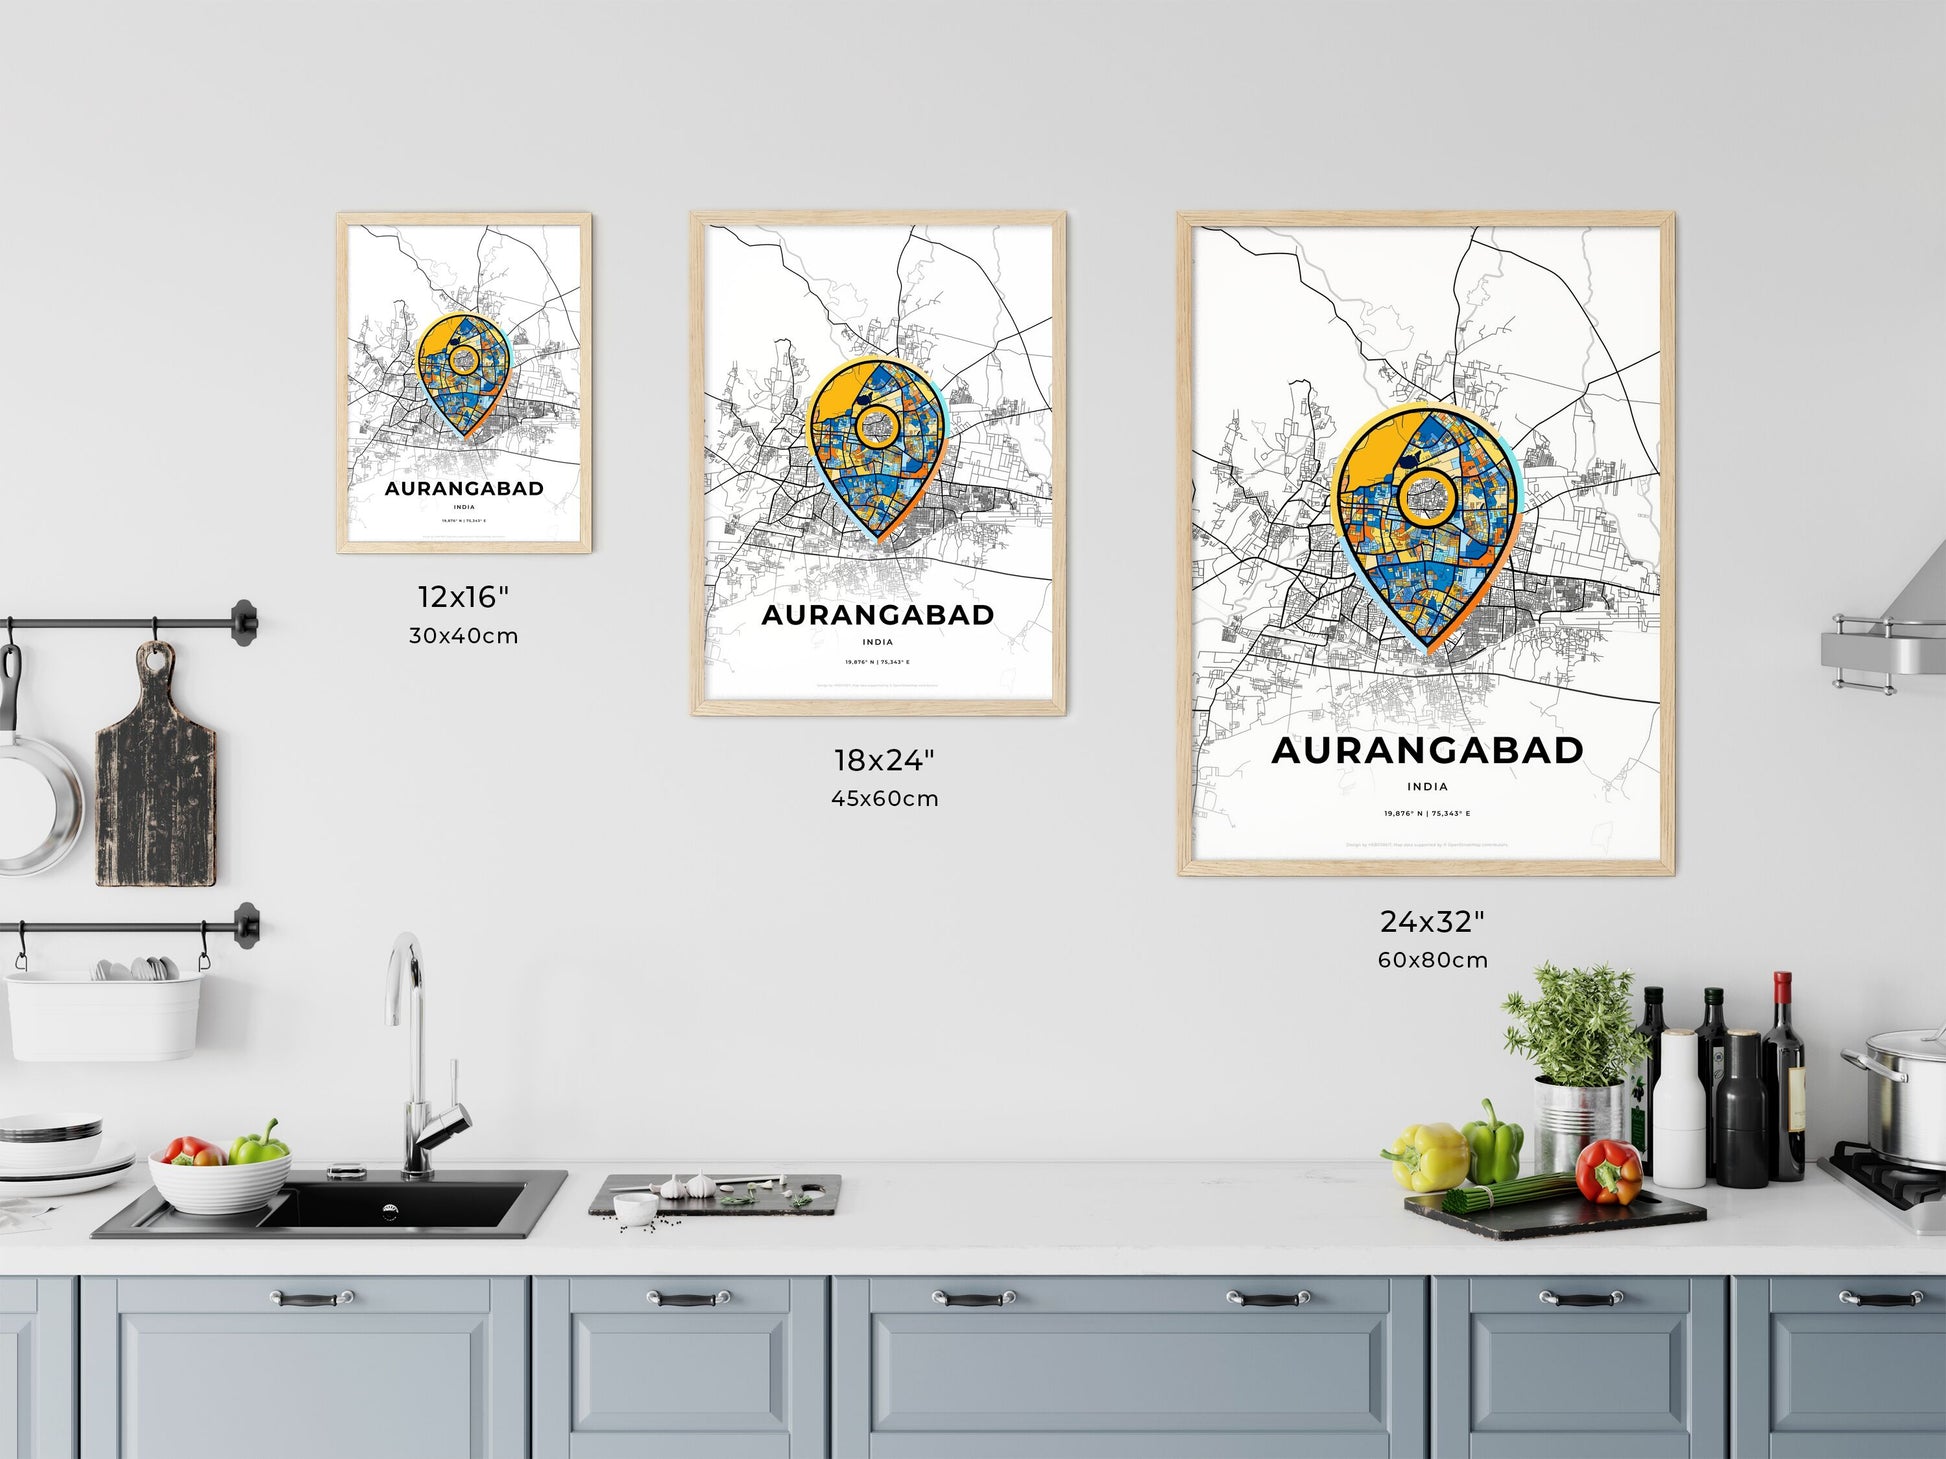 AURANGABAD INDIA minimal art map with a colorful icon. Where it all began, Couple map gift.